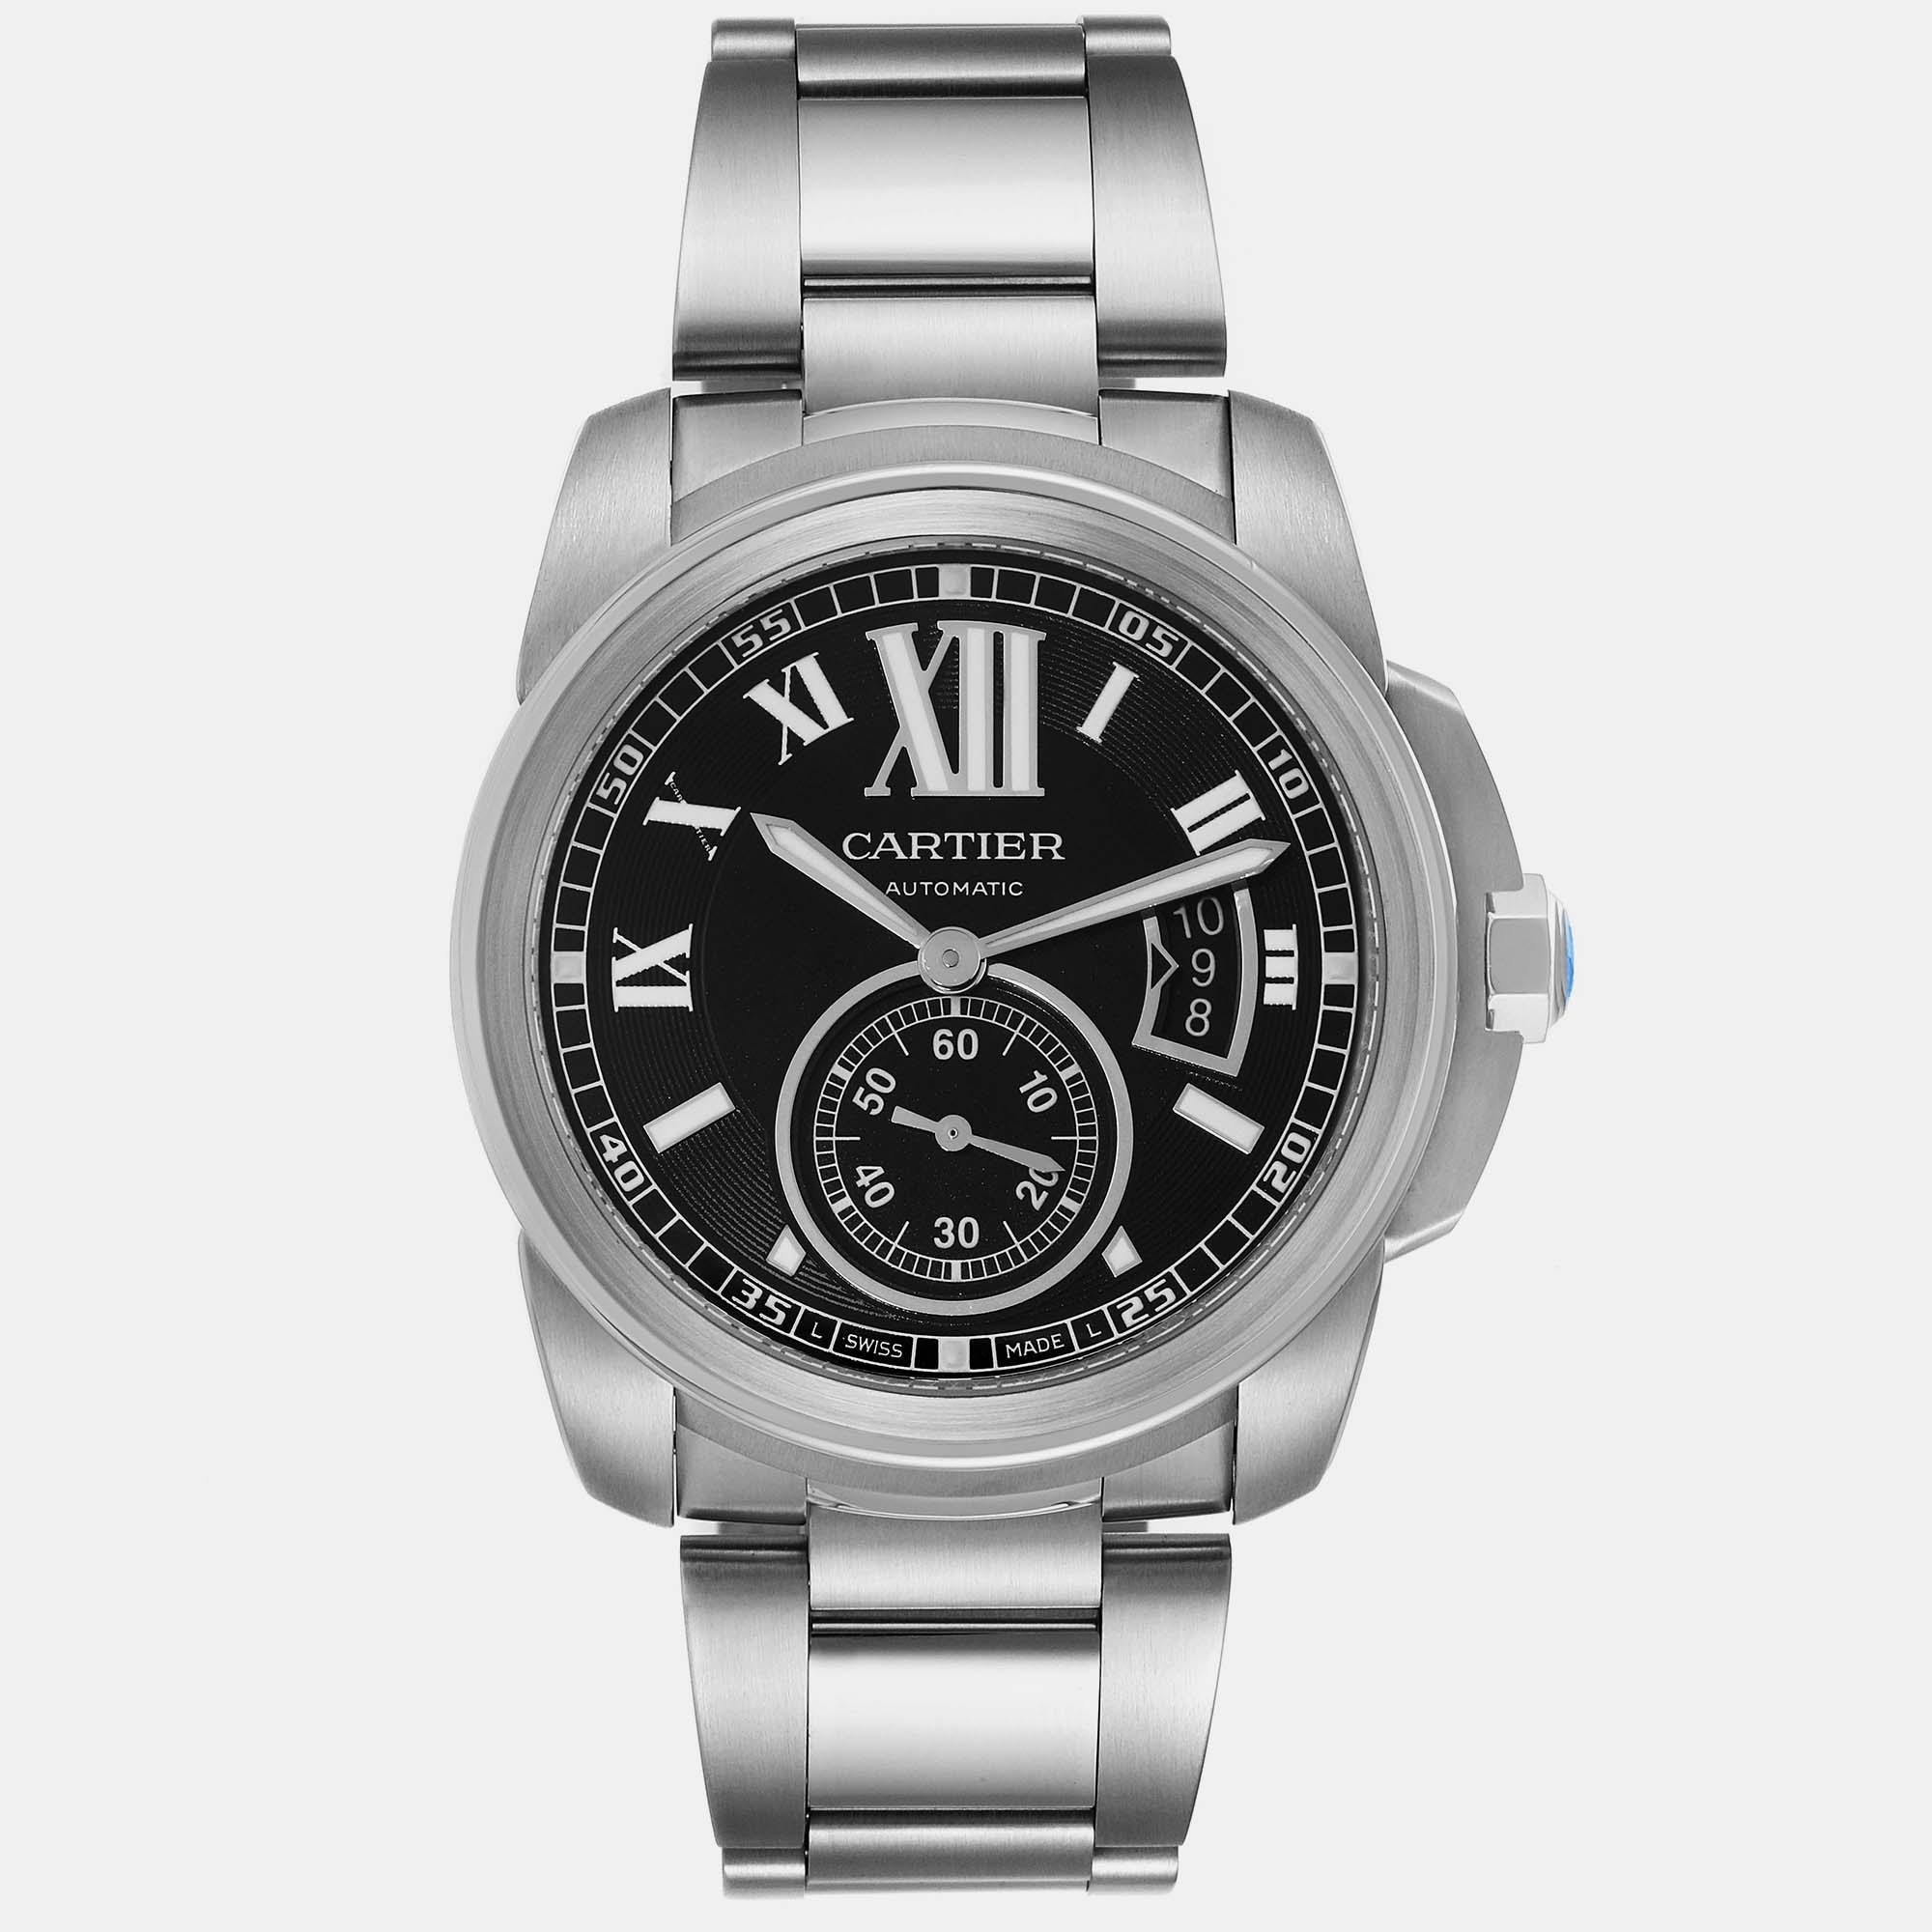 A classy silhouette made of high quality materials and packed with precision and luxury makes this authentic Cartier wristwatch the perfect choice for a sophisticated finish to any look. It is a grand creation to elevate the everyday experience.